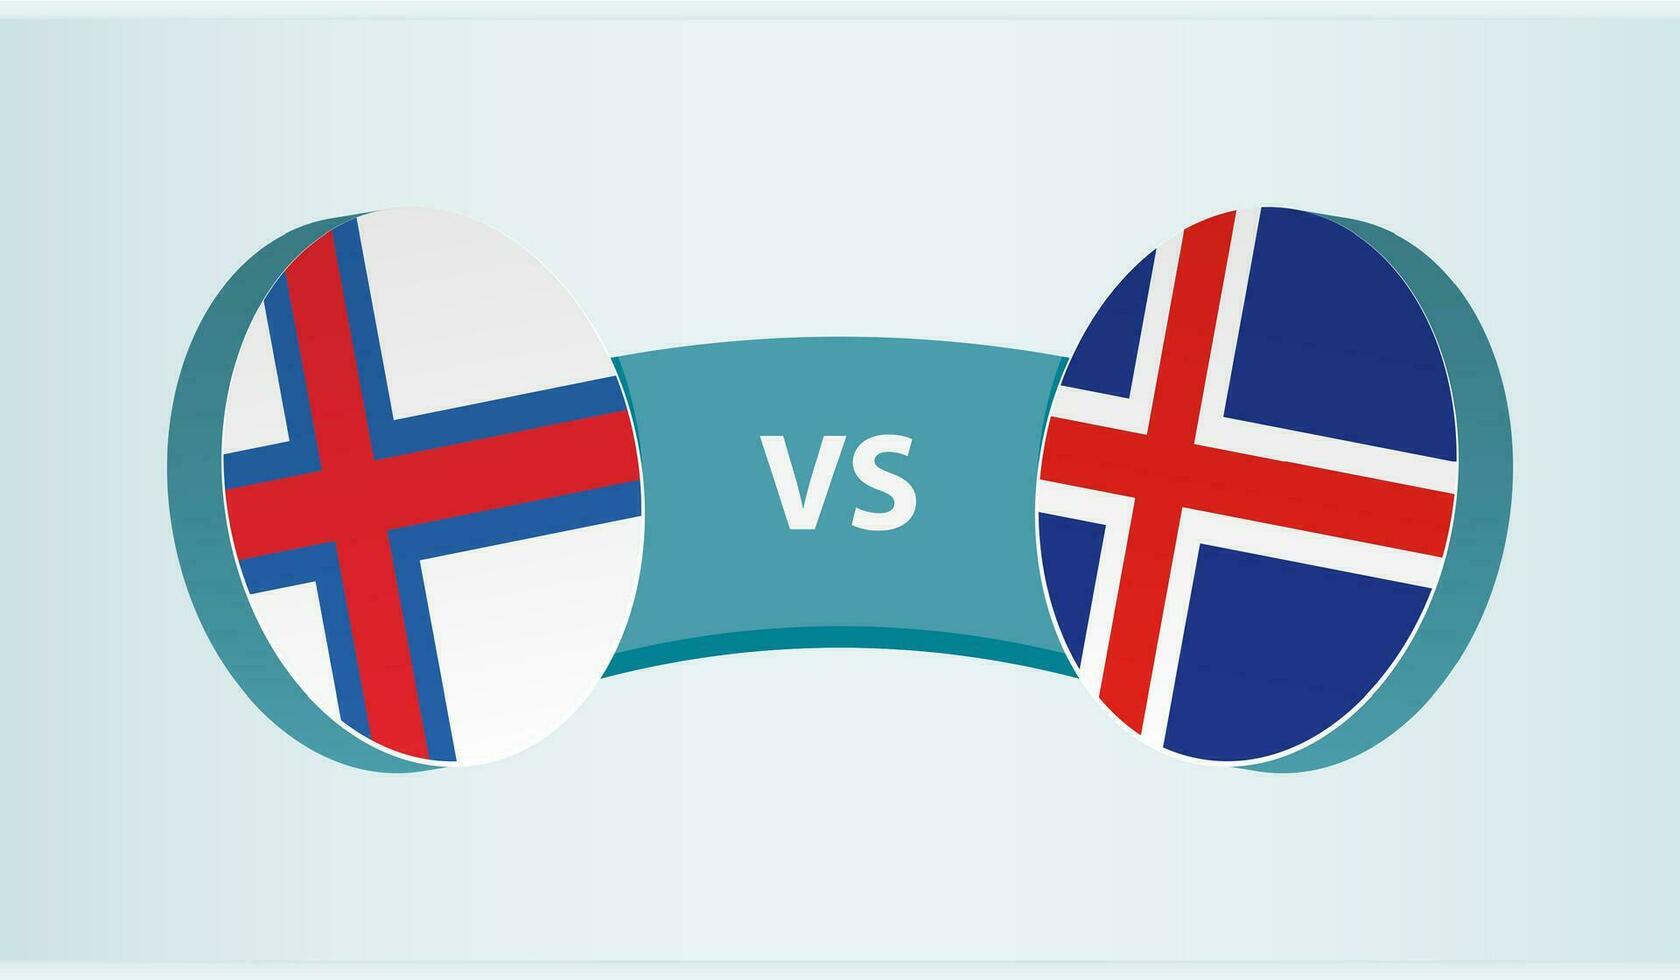 Faroe Islands versus Iceland, team sports competition concept. vector